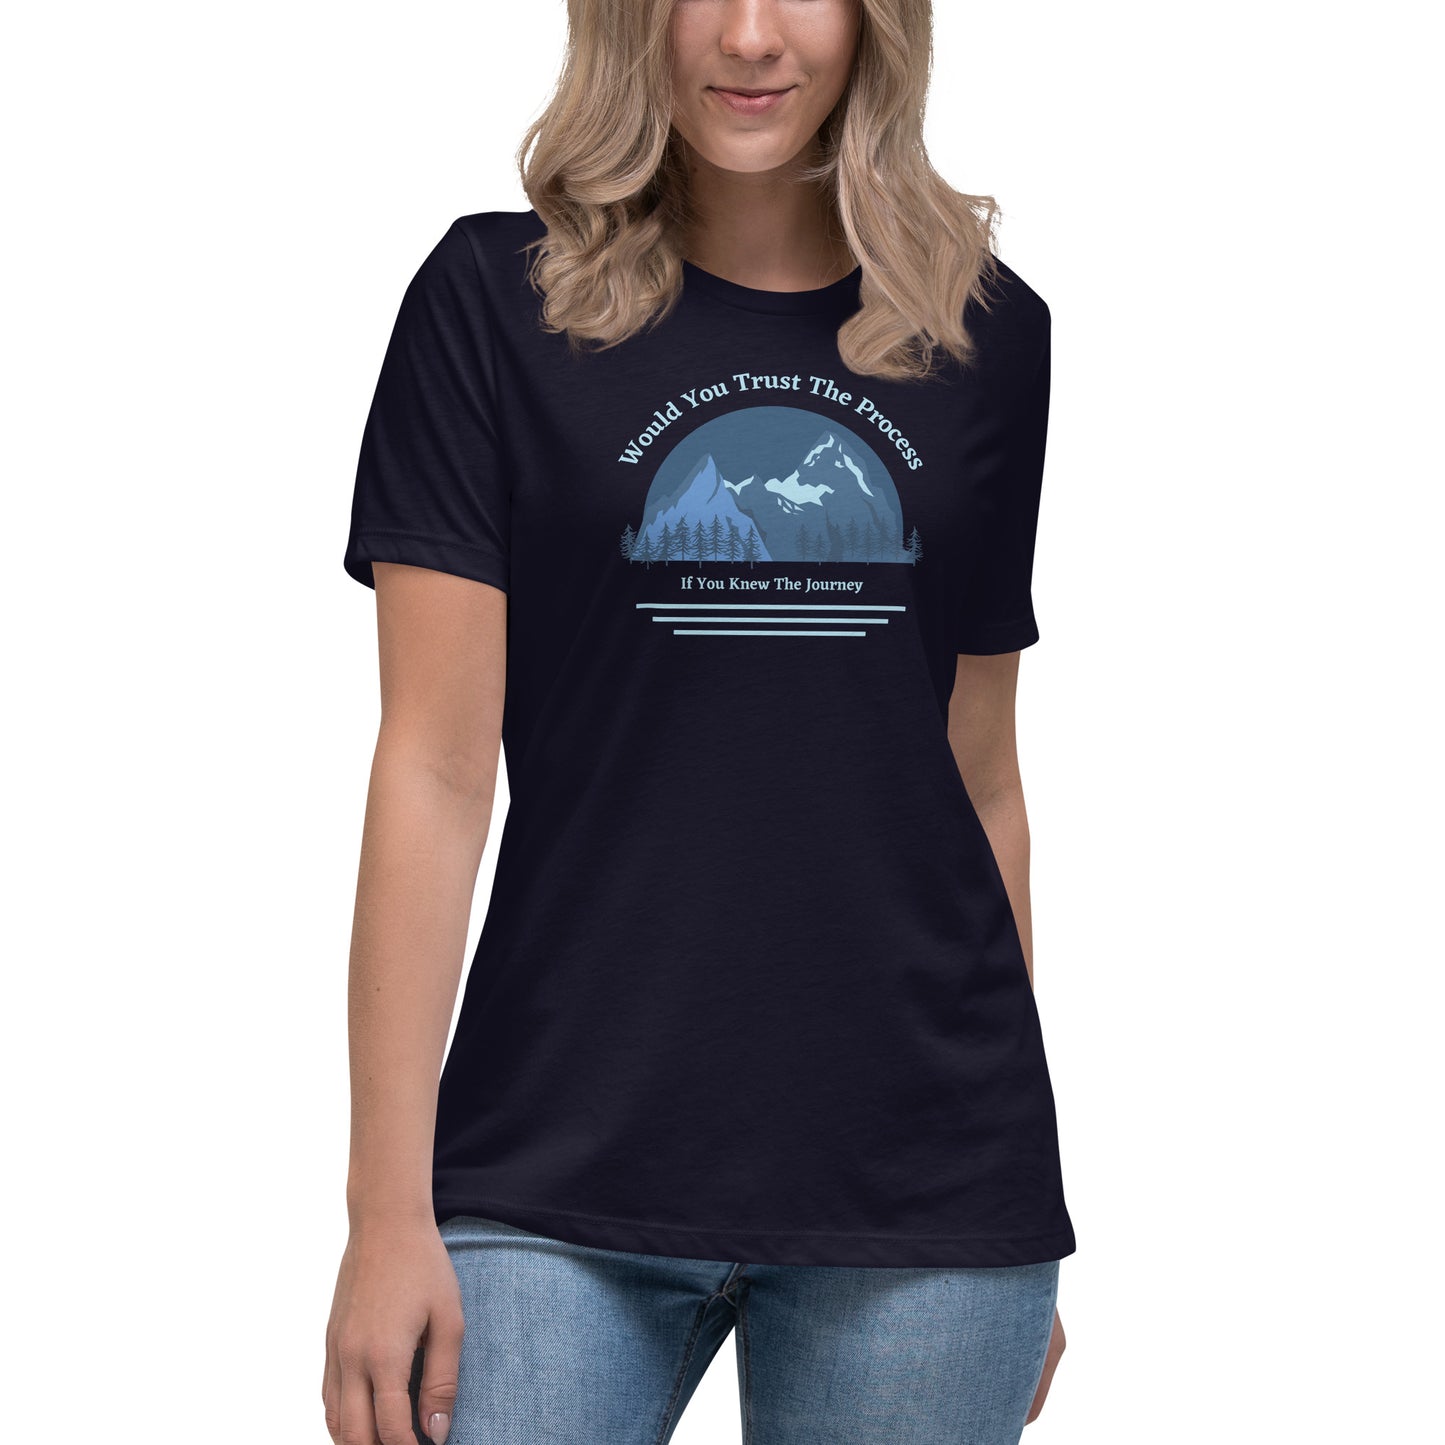 Would You Trust The Process If You Knew The Journey Women's Relaxed T-Shirt